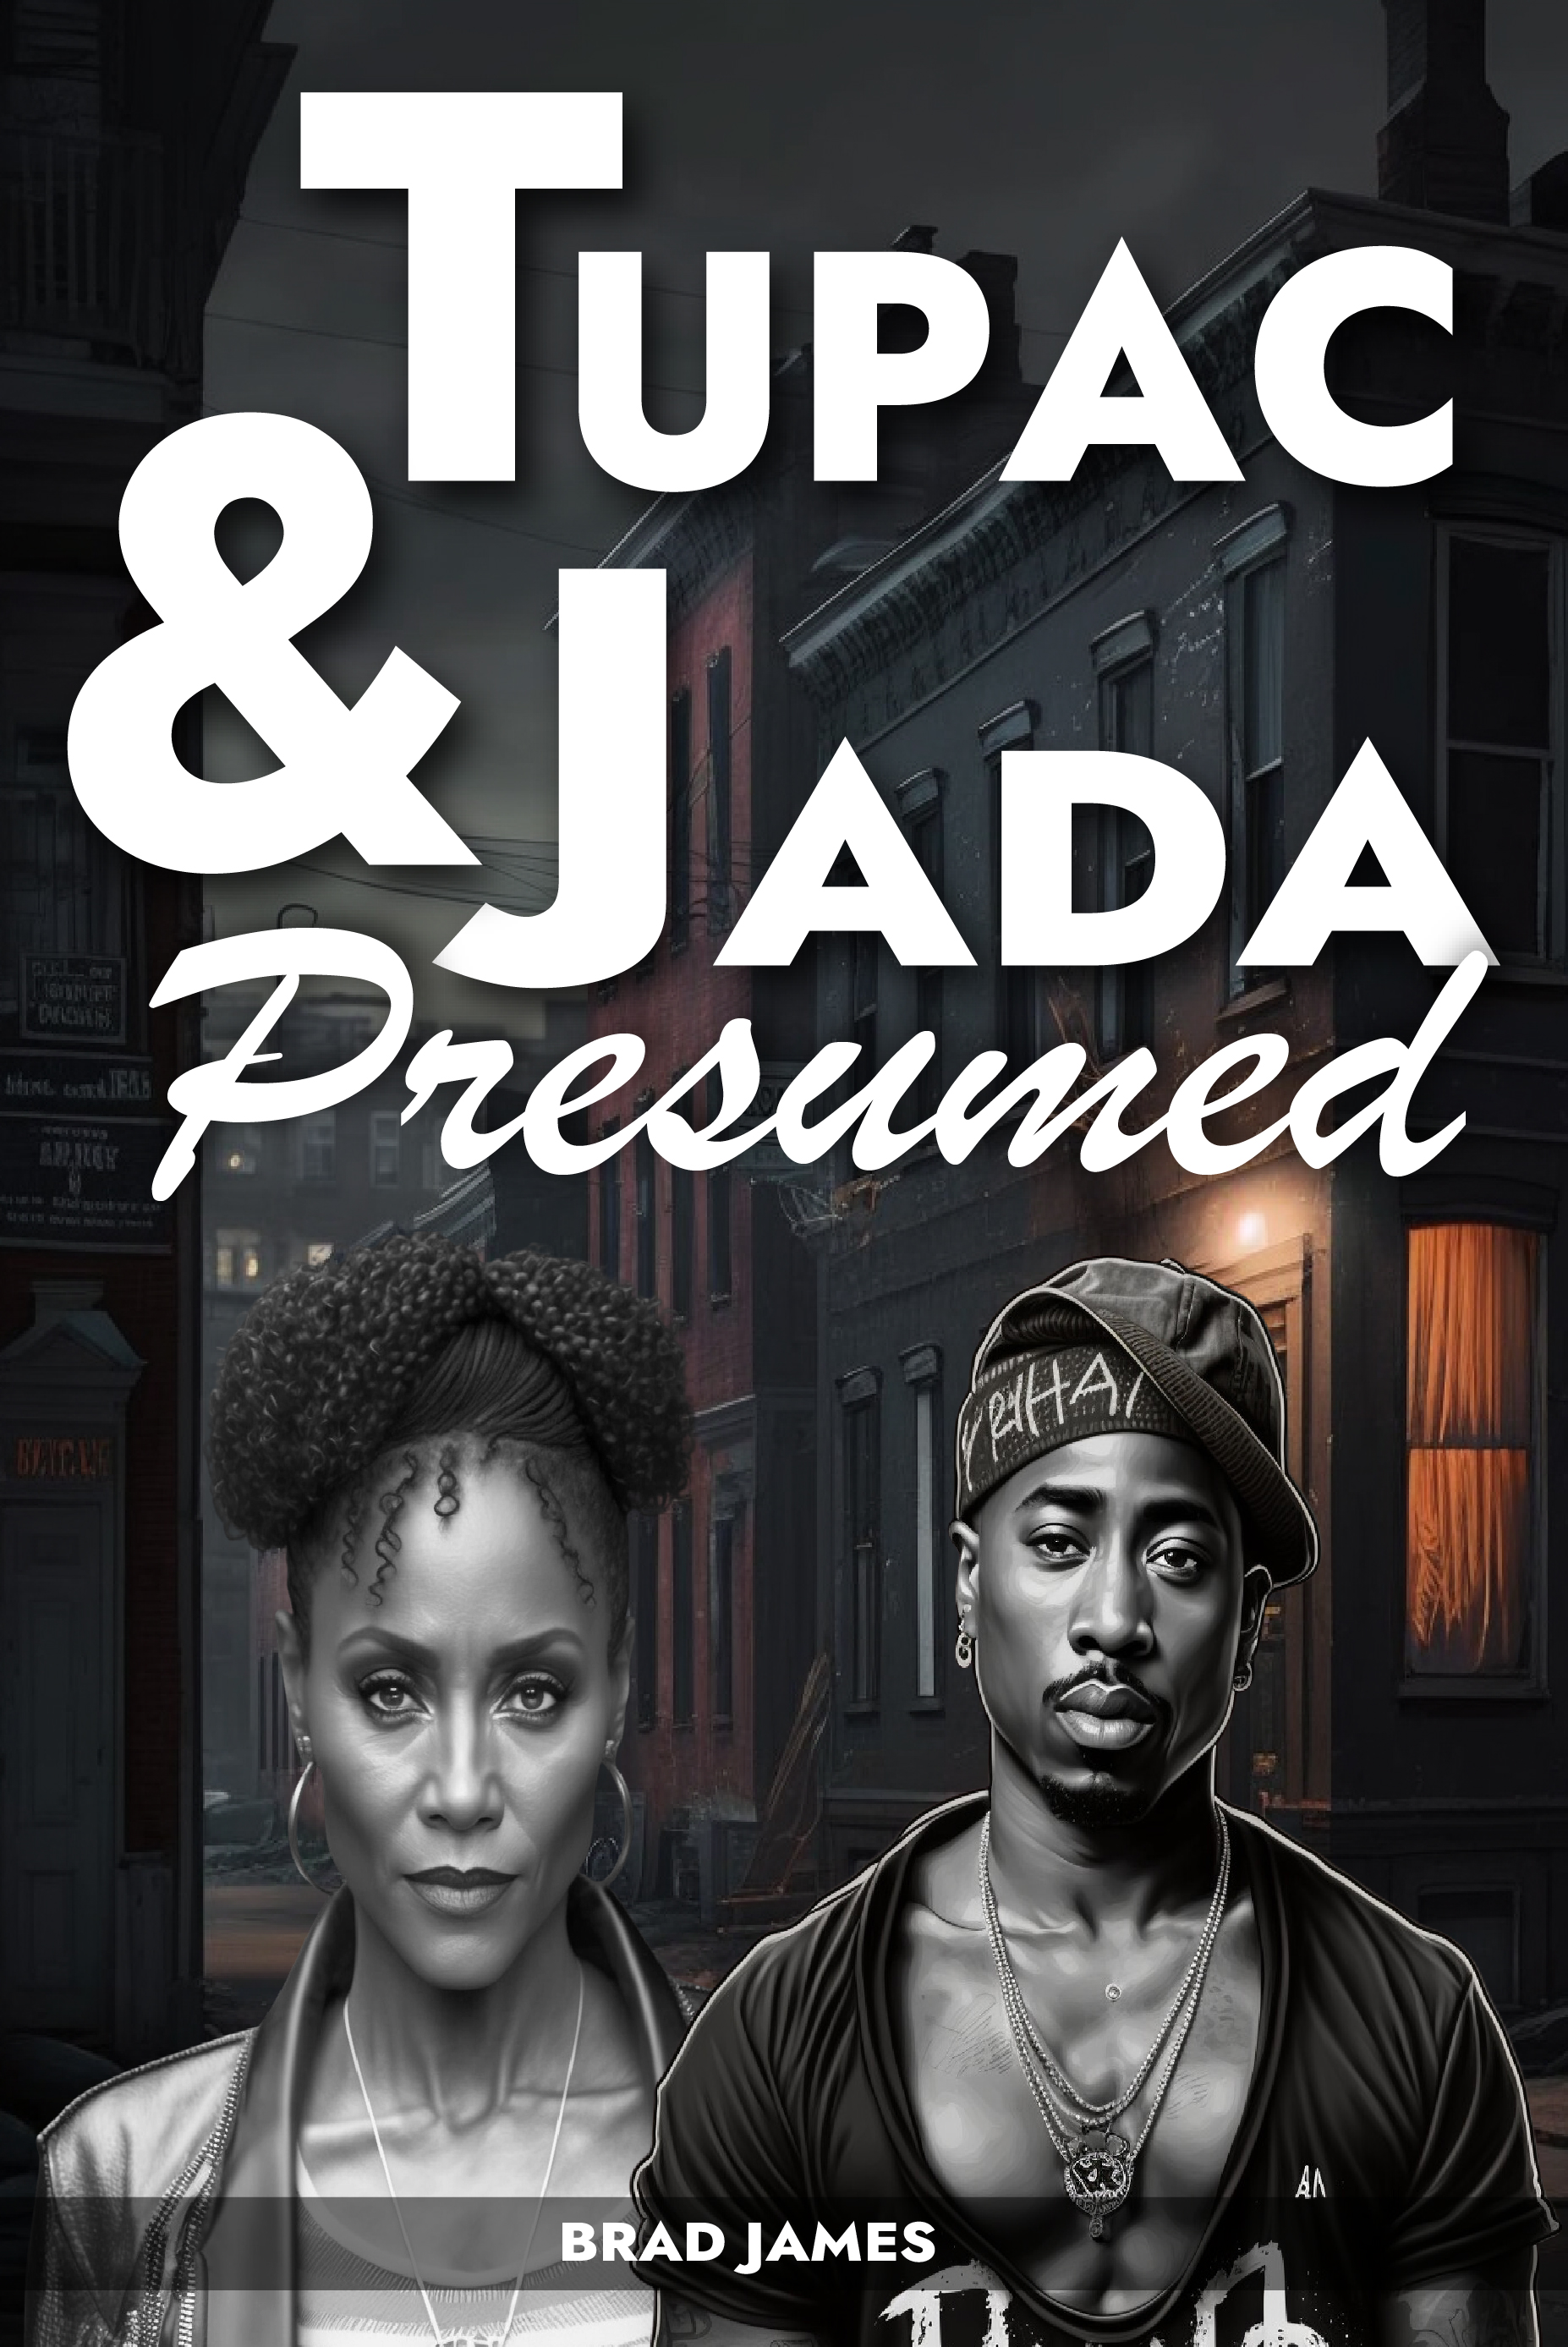 Exploring the Deep Bond and Artistic Journey of Tupac and Jada in 'Tupac and Jada Presumed' by Brad James